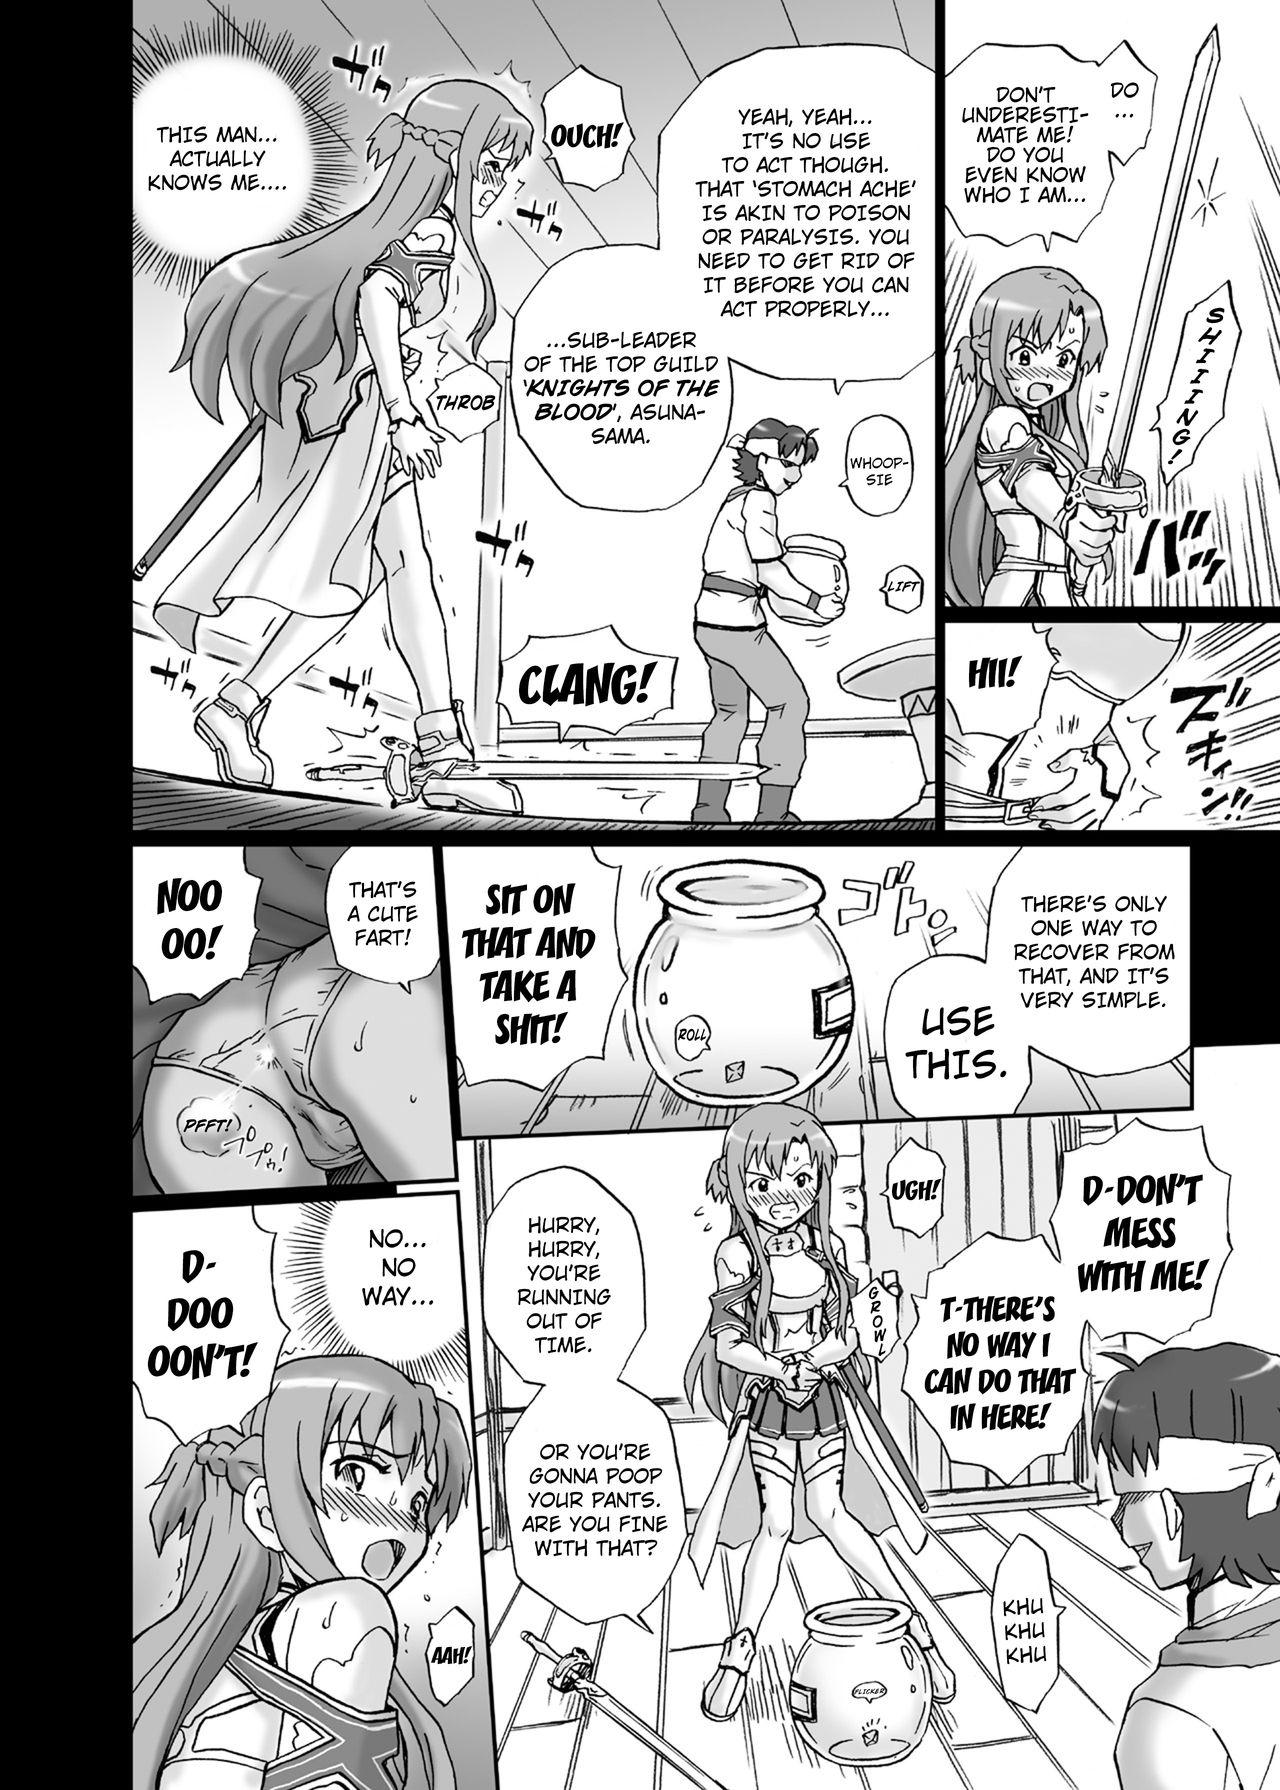 Tiny Titties TAIL-MAN ASUNA BOOK - Sword art online Free 18 Year Old Porn - Page 7